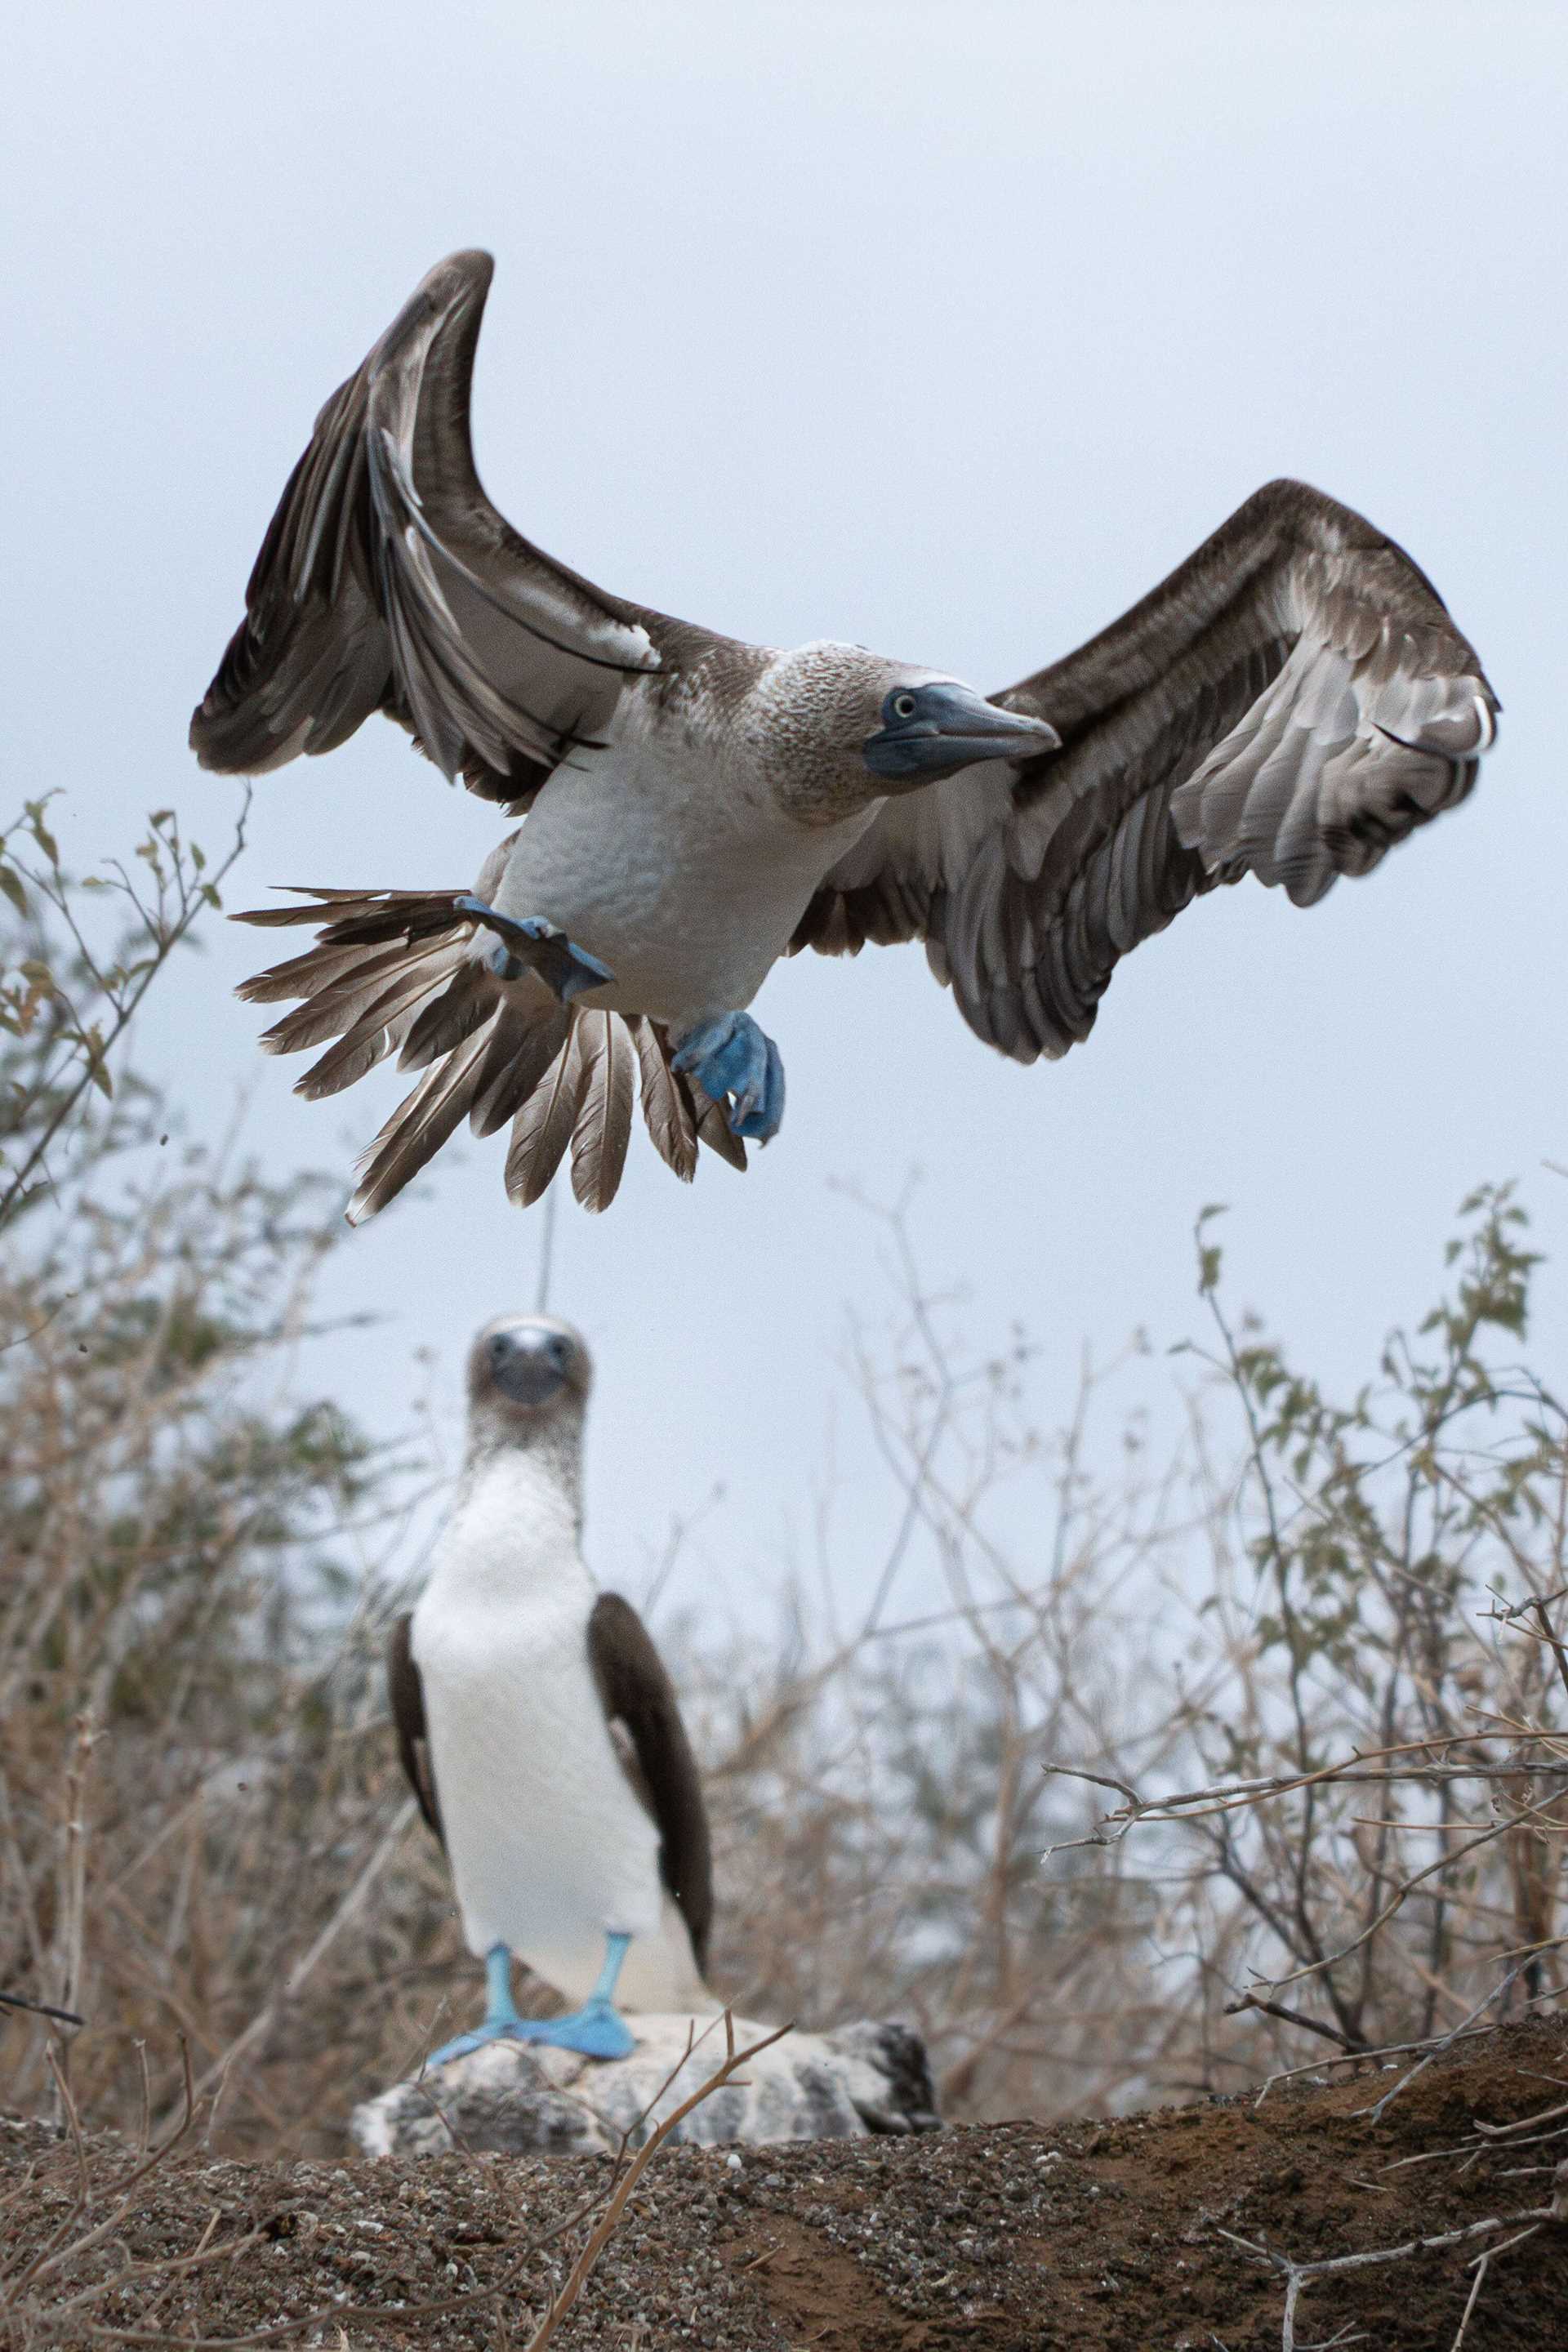 two blue-footed boobies, one standing on the ground and one in flight